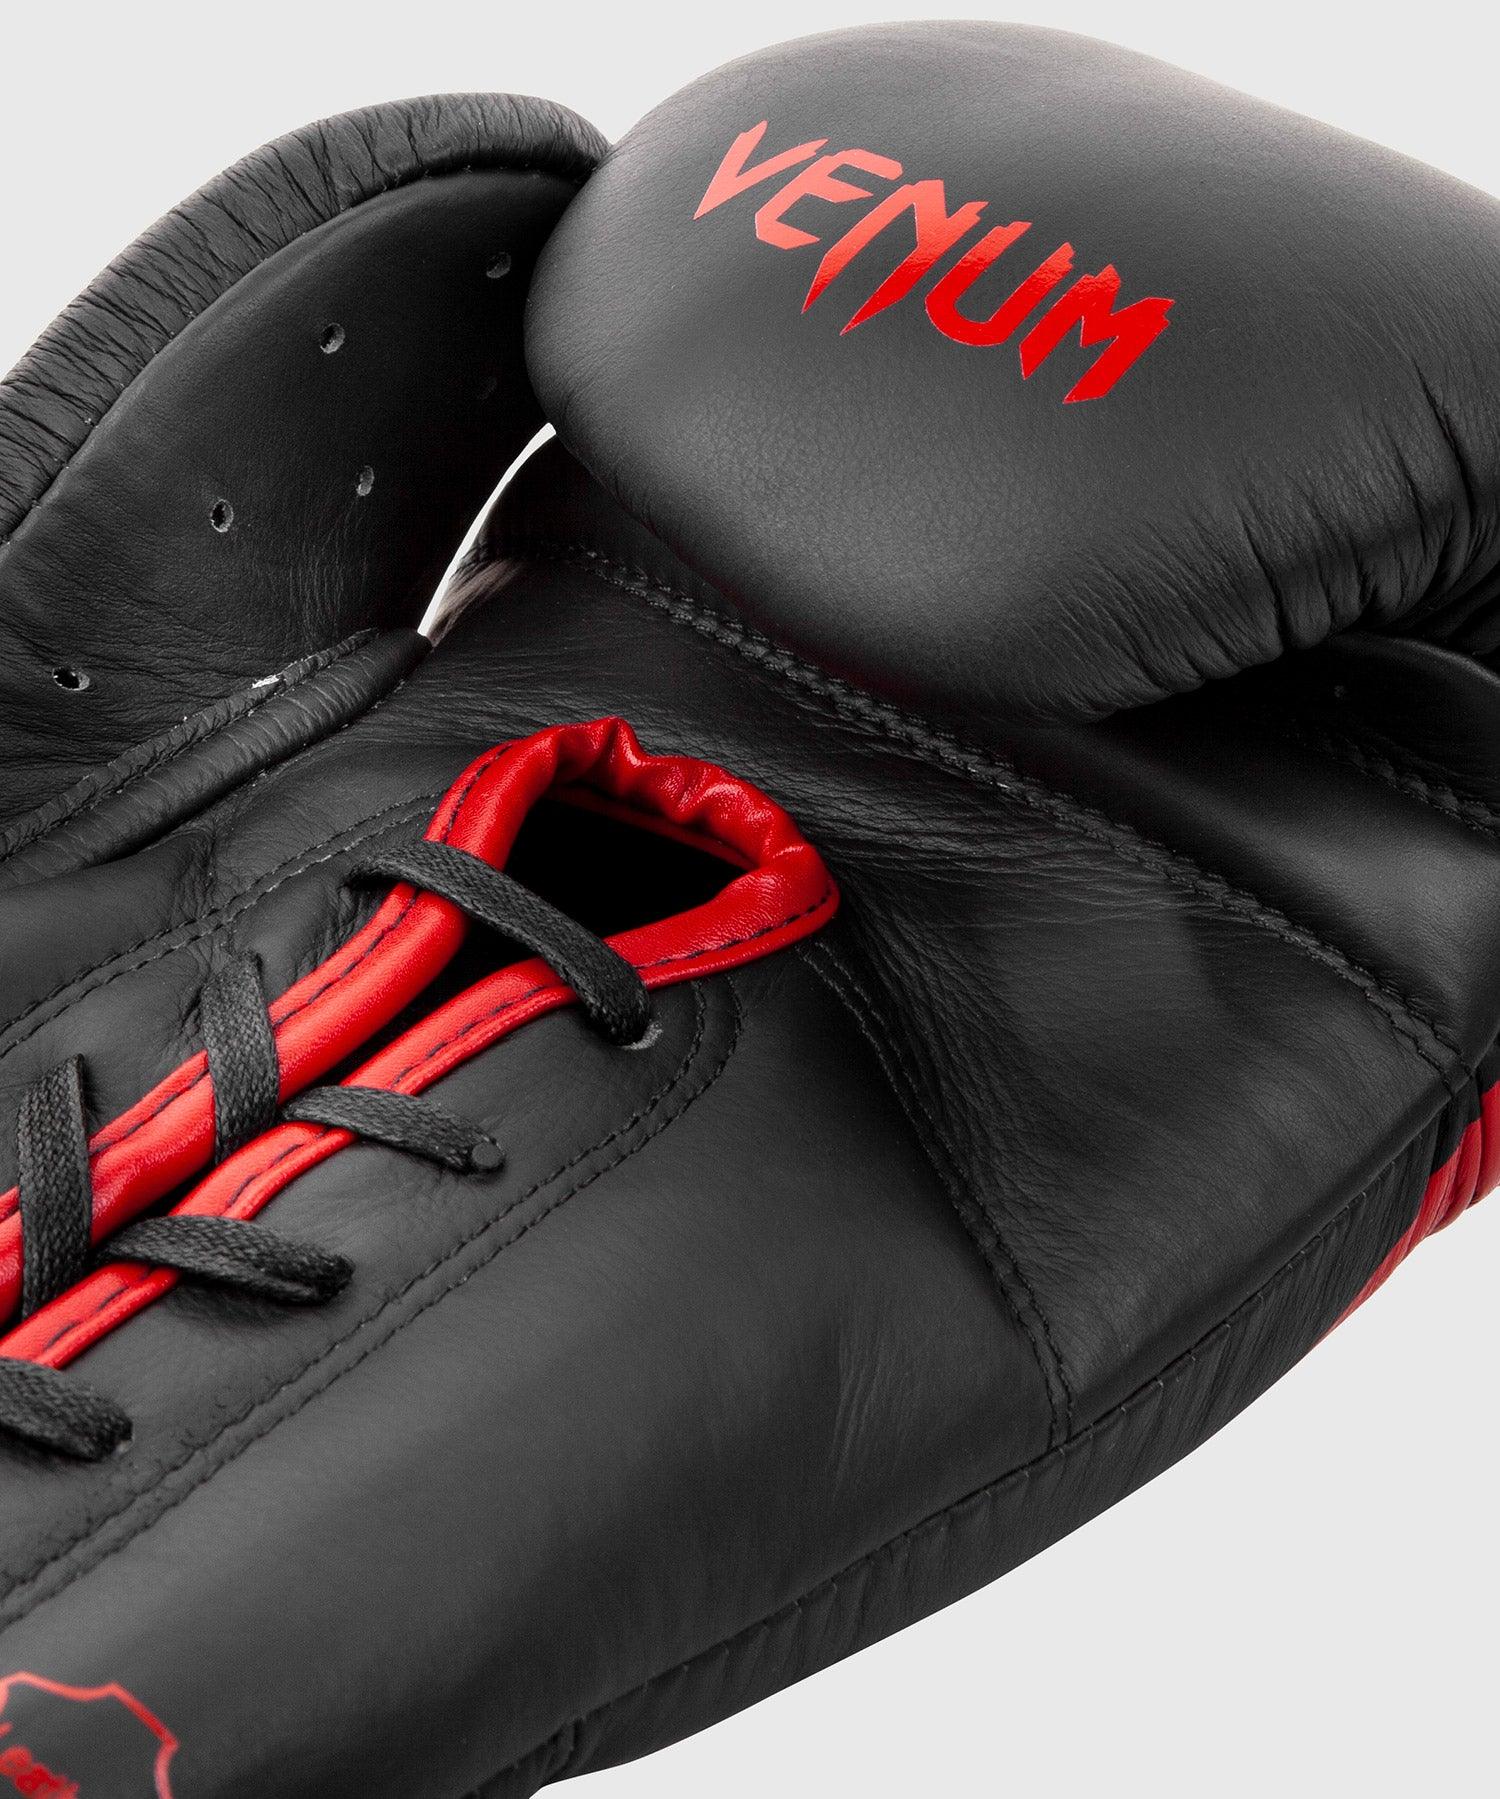 Venum Giant 2.0 Pro Boxing Gloves - With Laces - Black/Red Picture 6